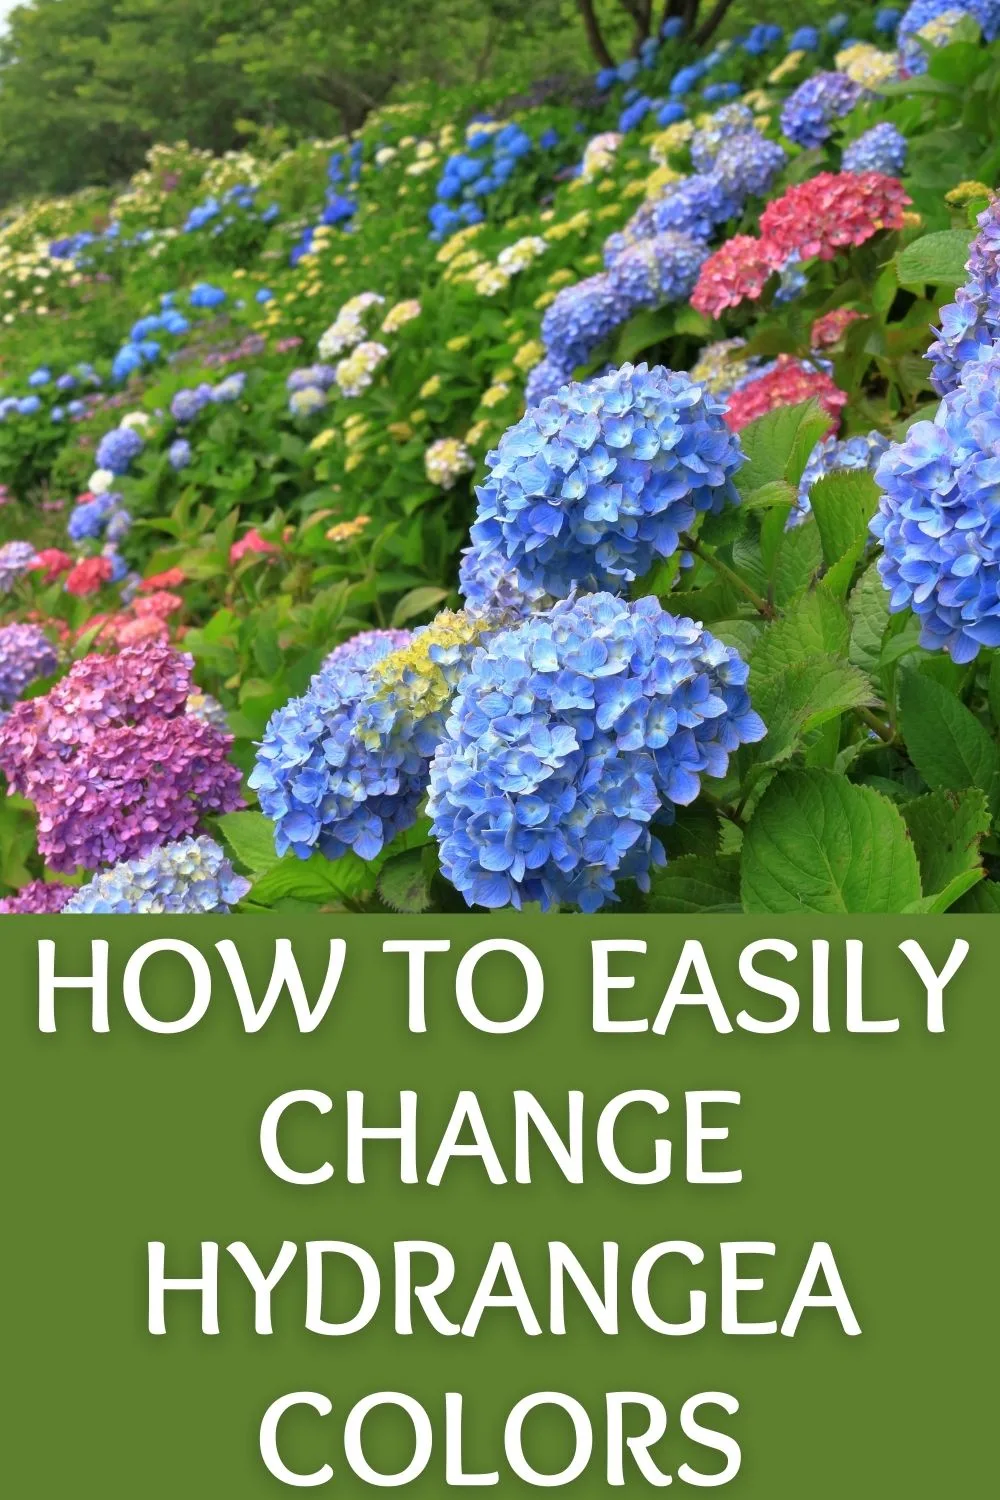 How to easily change hydrangea colors